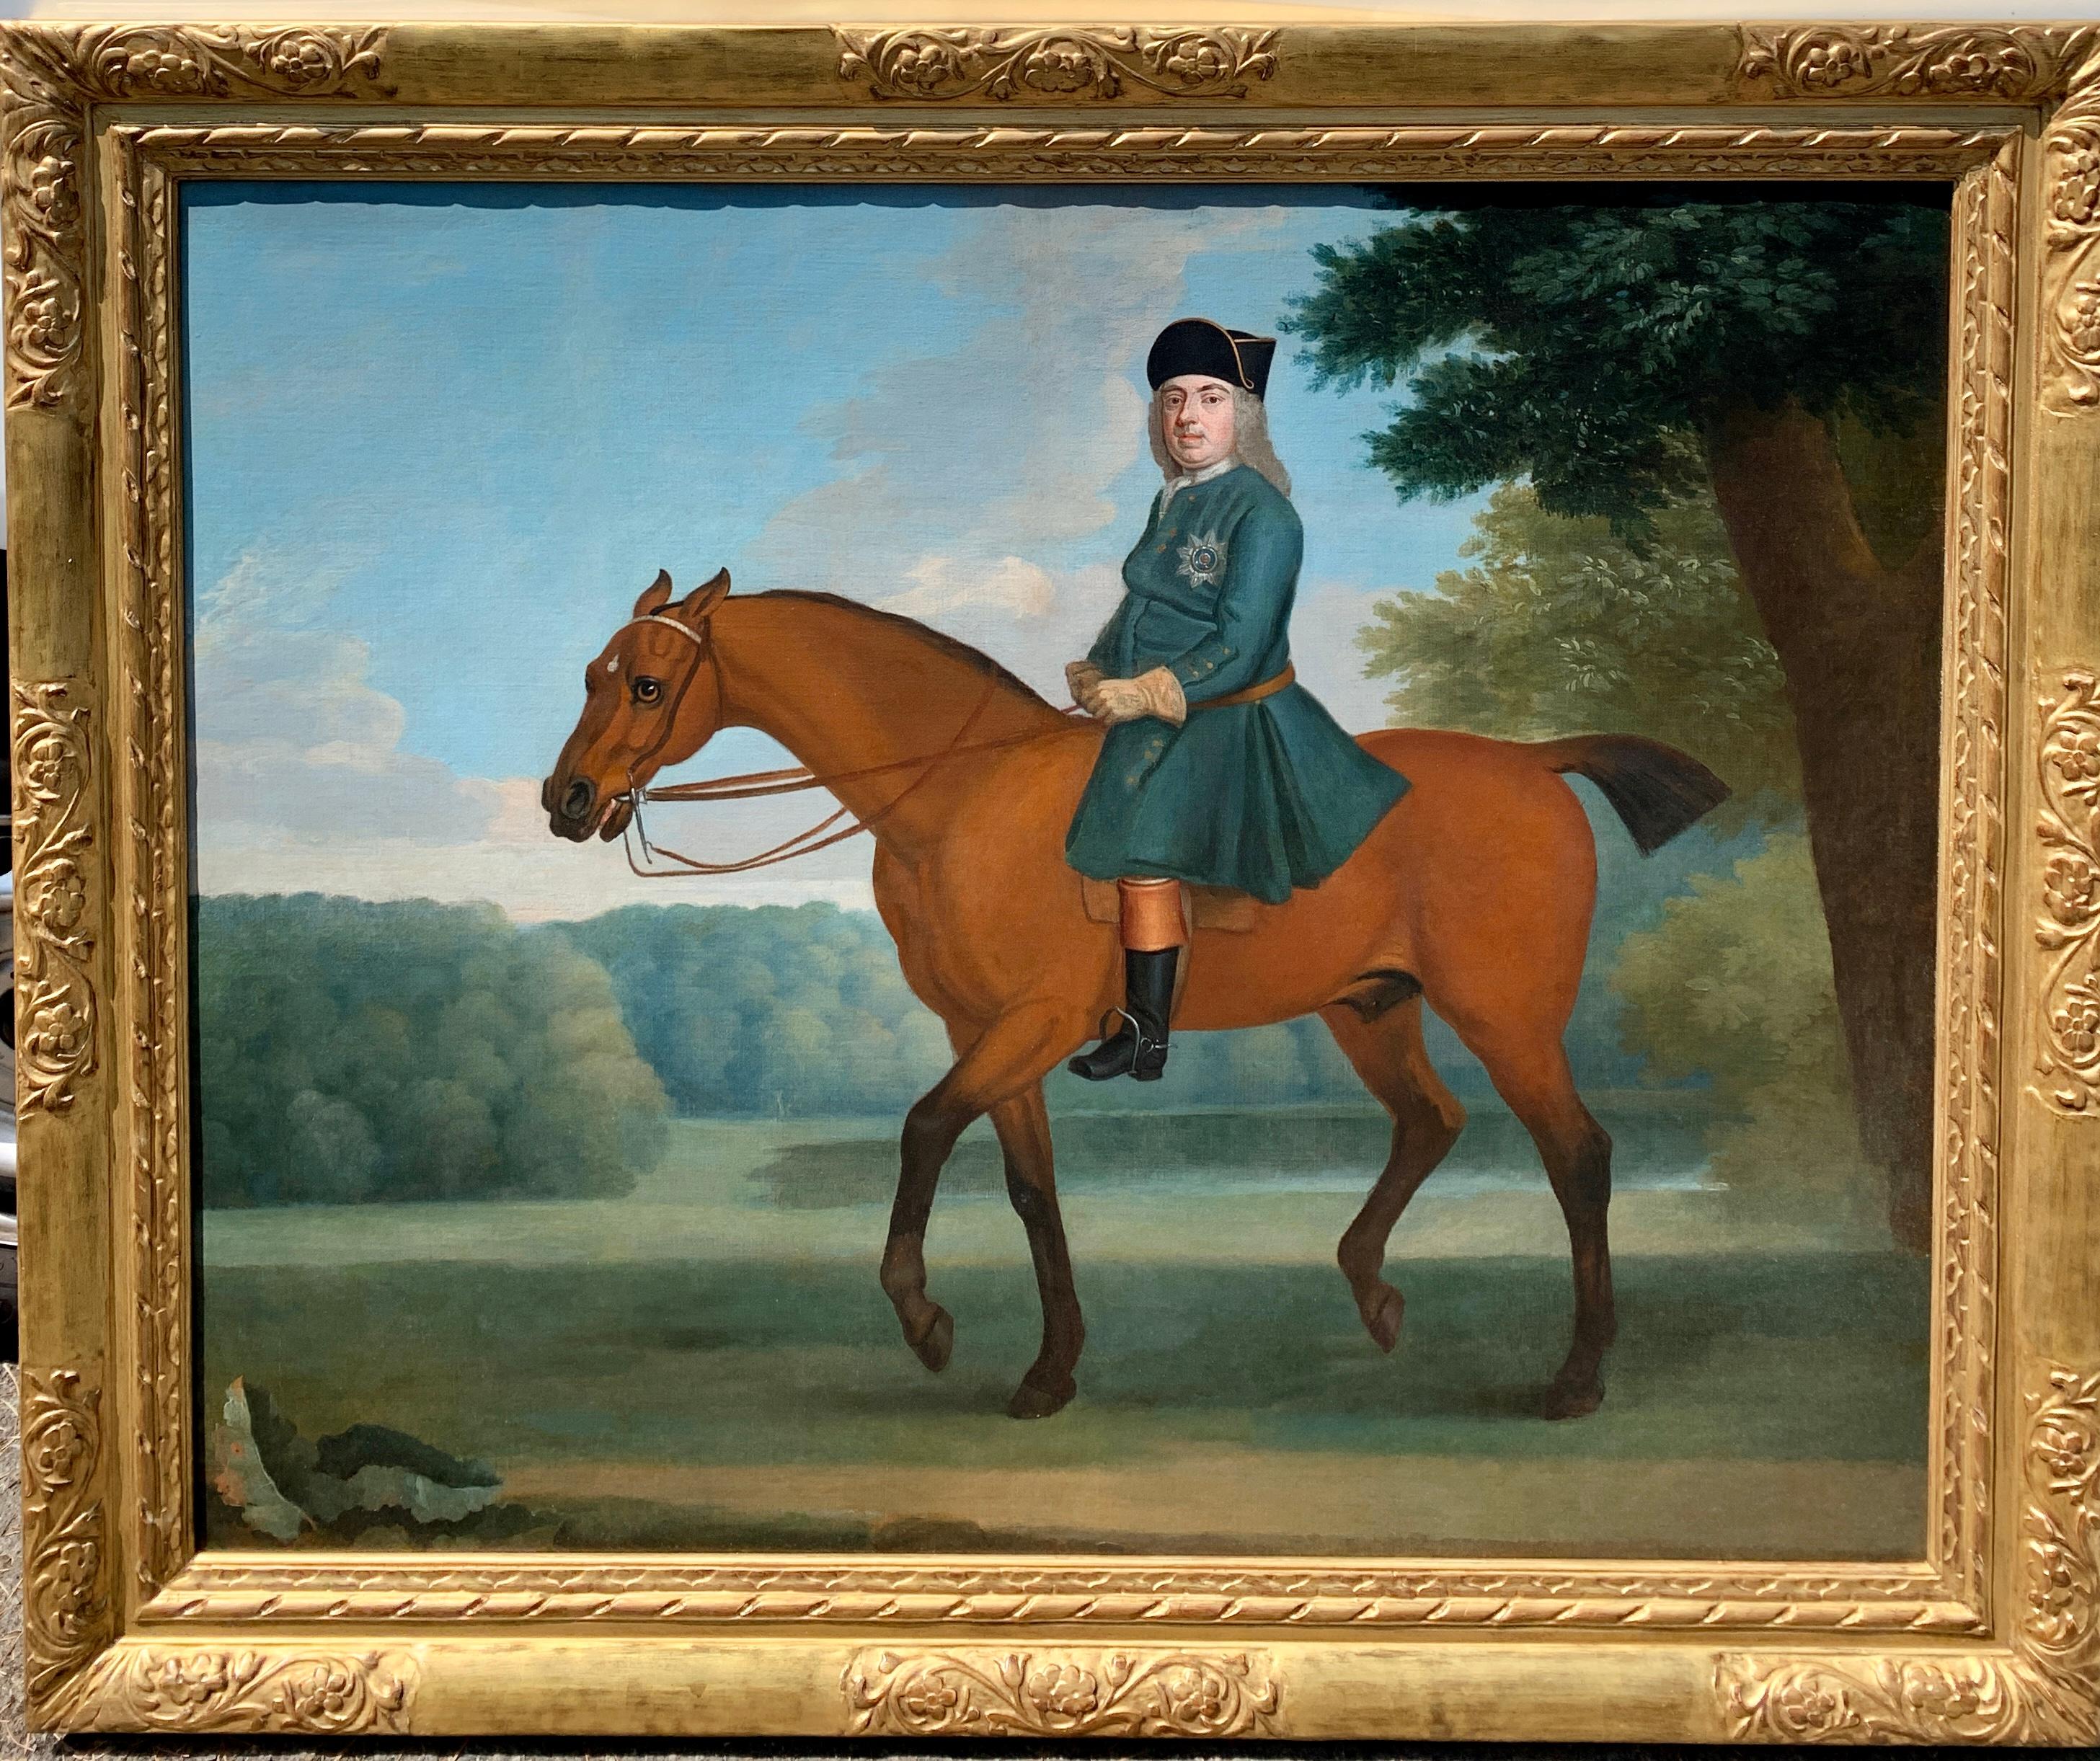 18th century English portrait of the Duke of Newcastle upon his horse in 